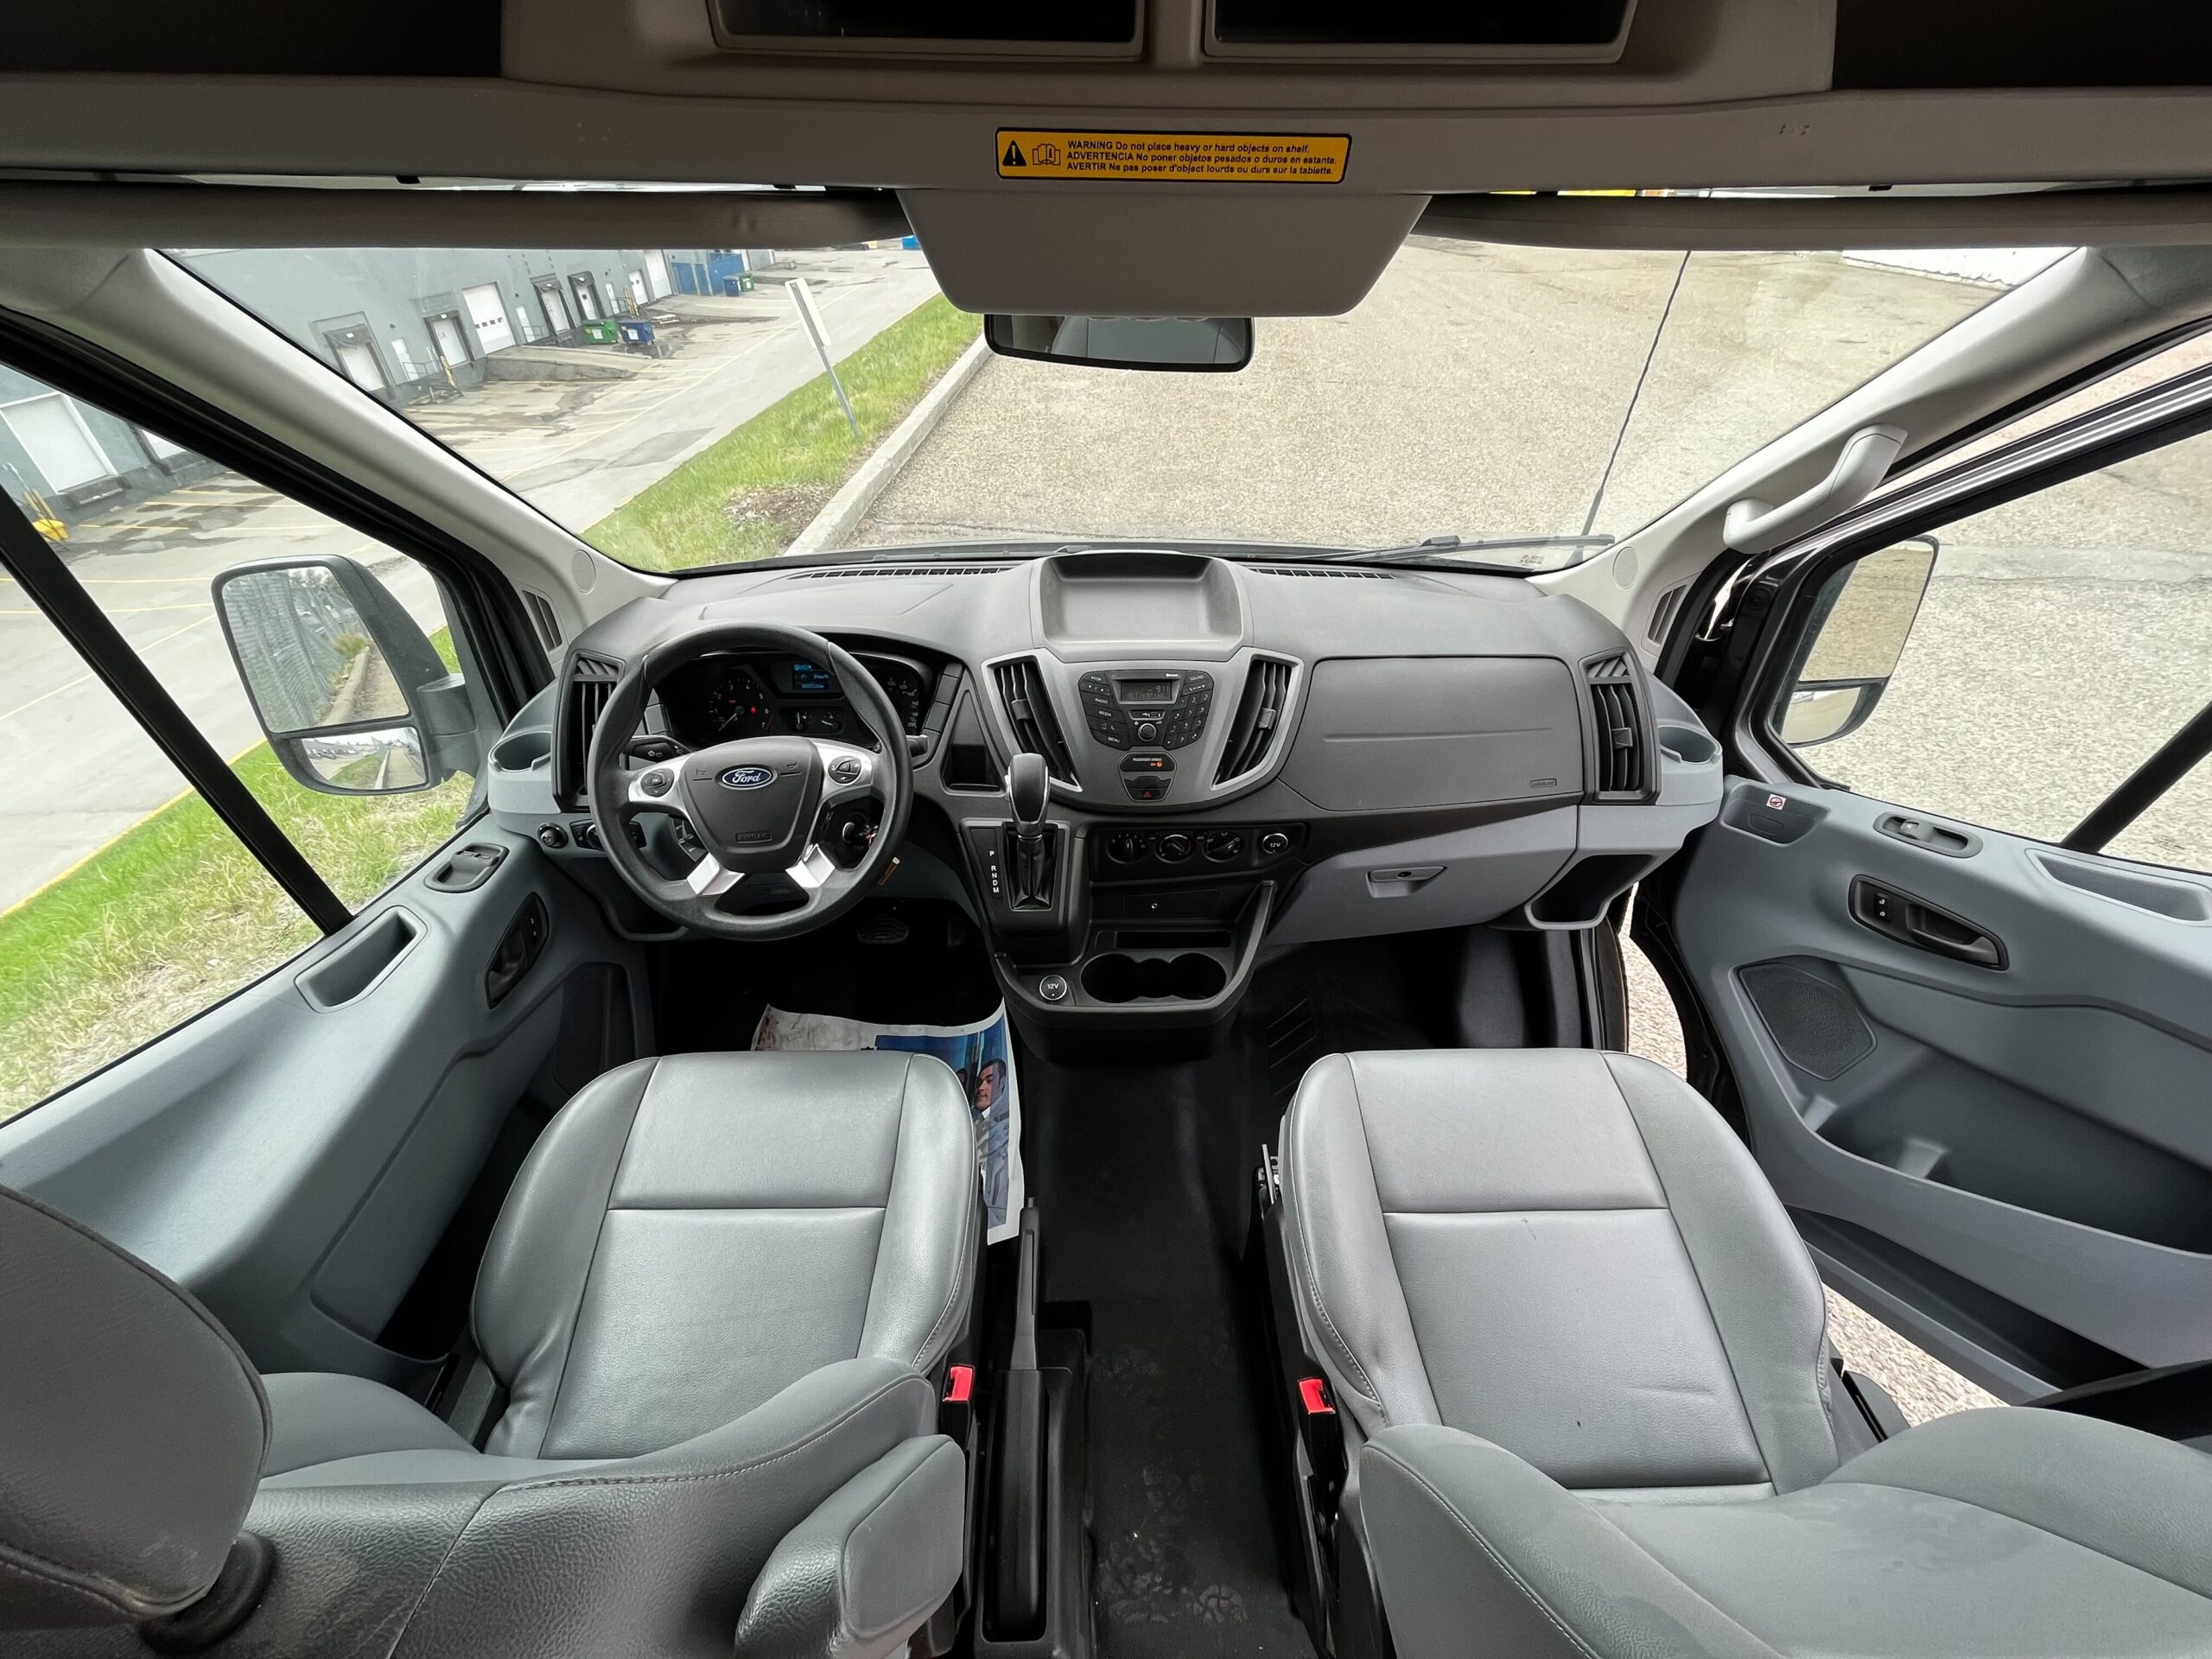 interior view of the front seats in a camper van